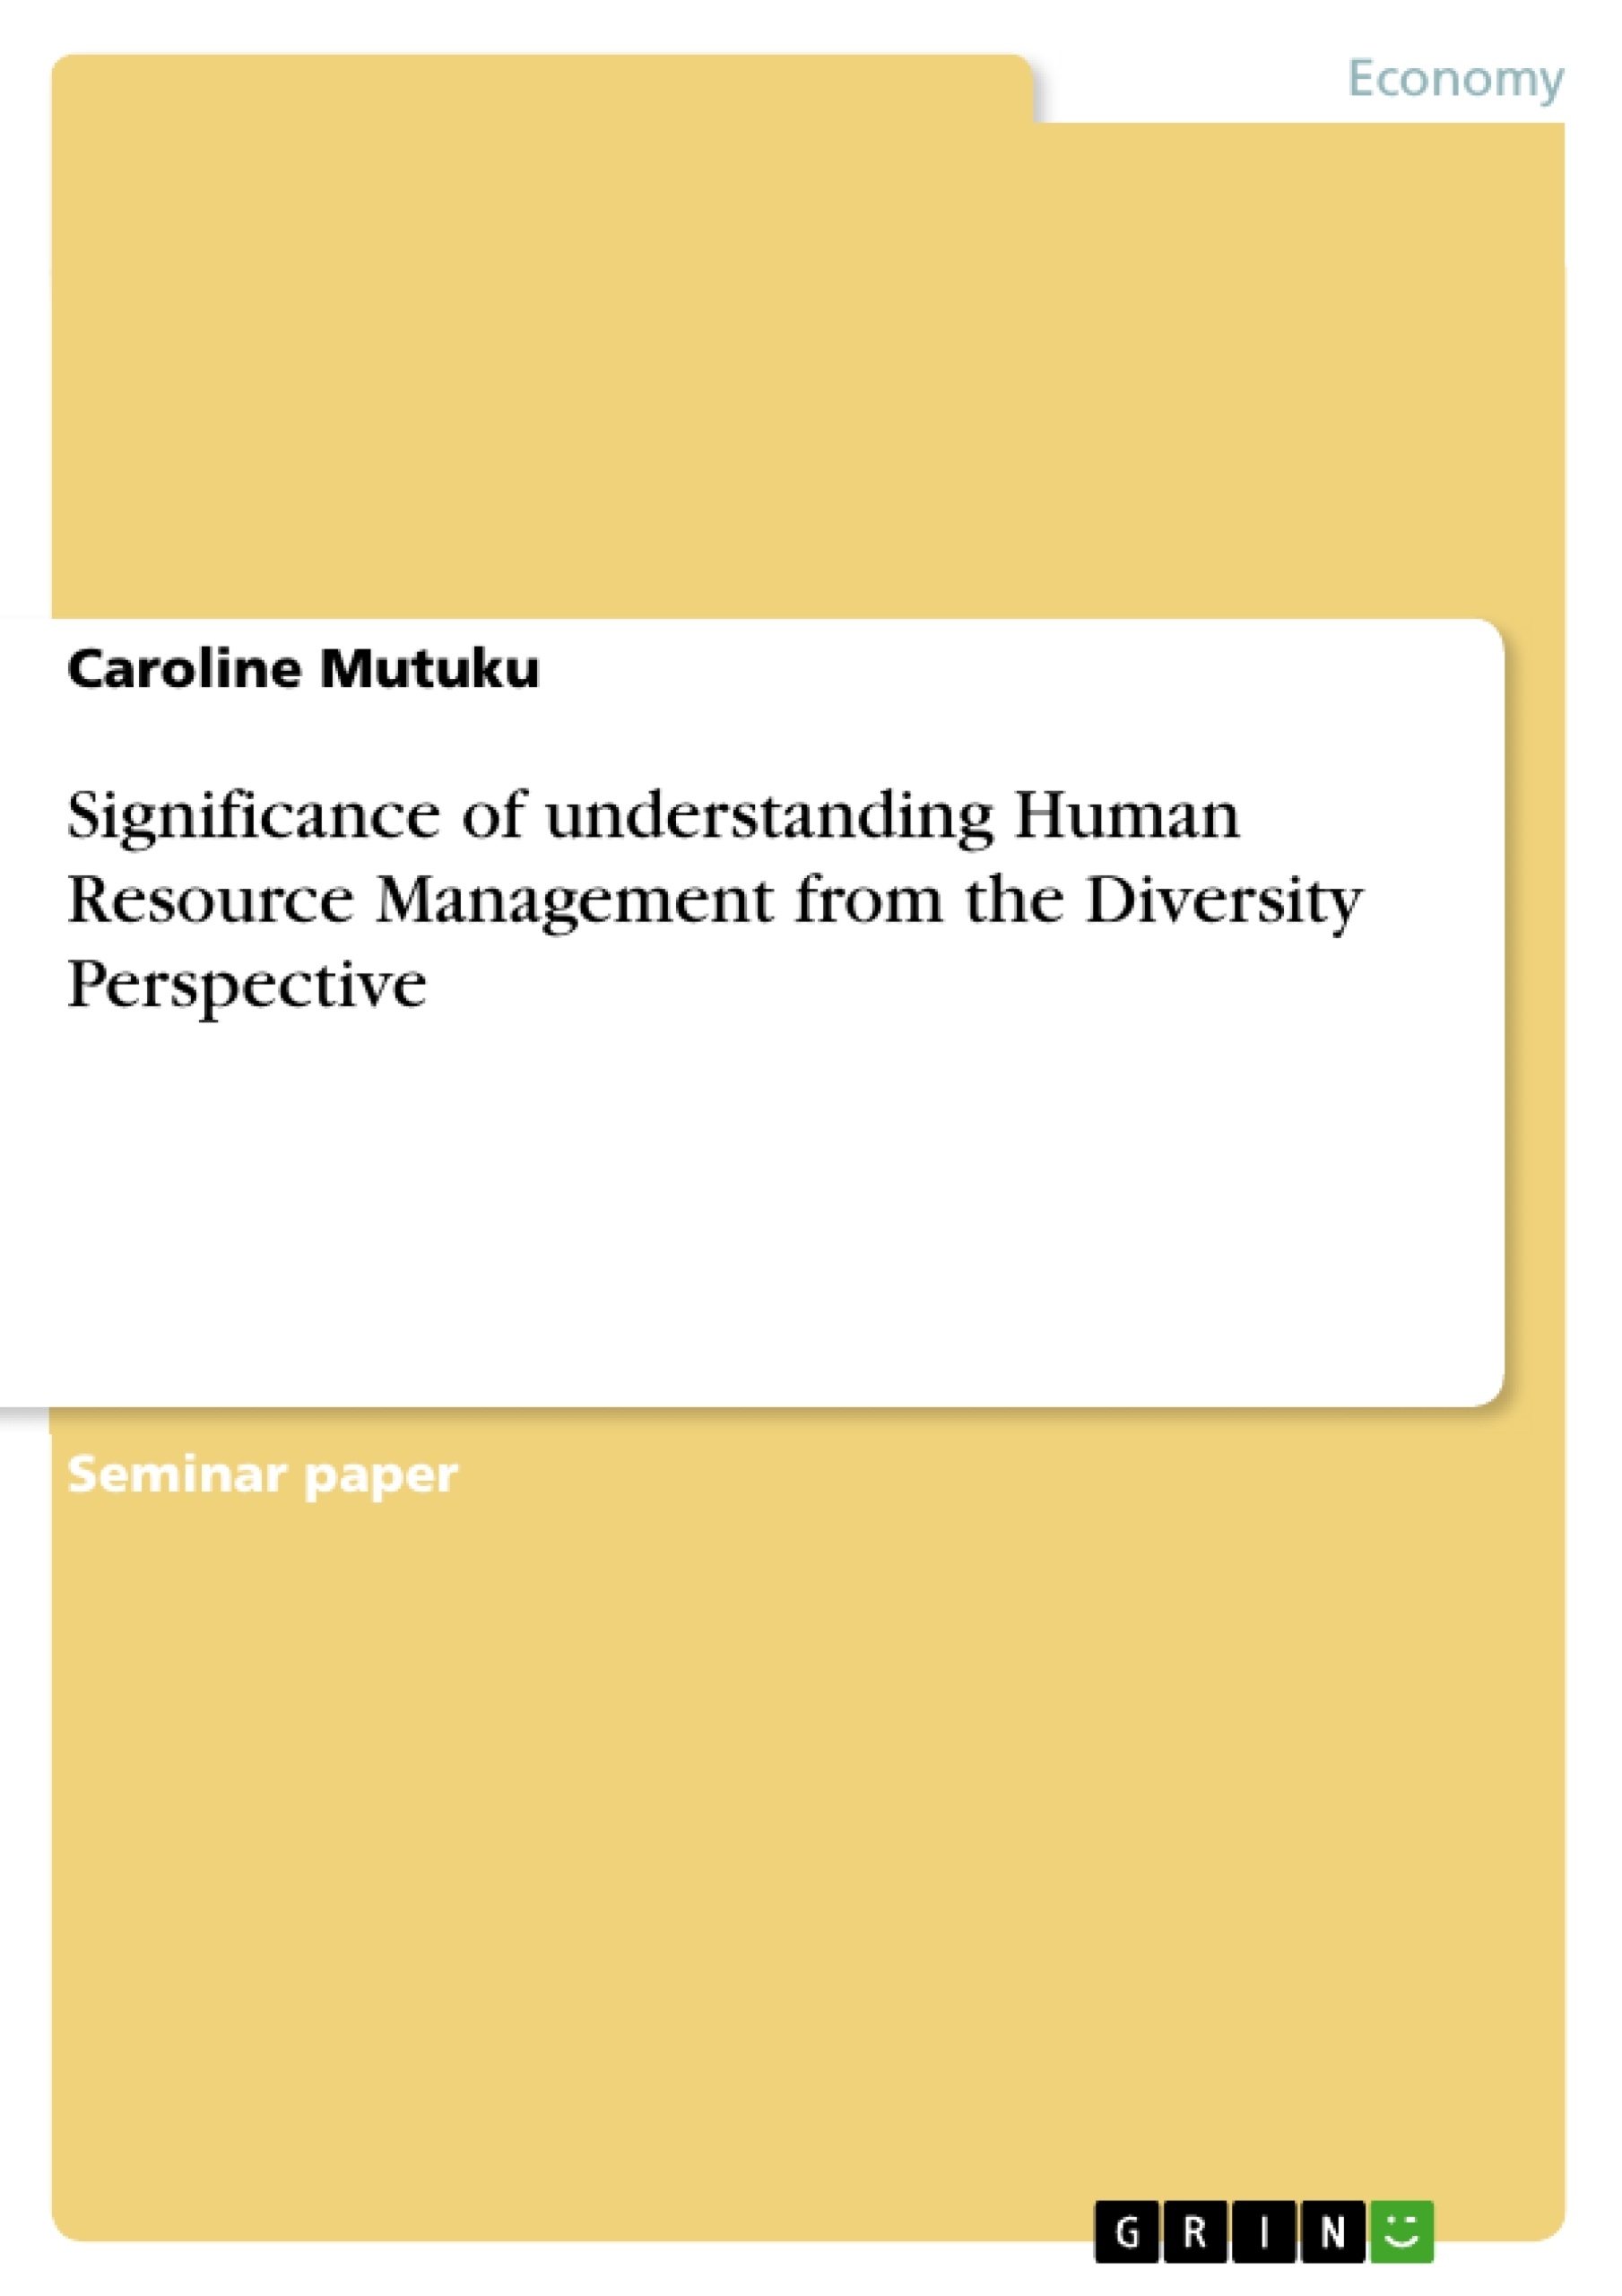 Titre: Significance of understanding Human Resource Management from the Diversity Perspective